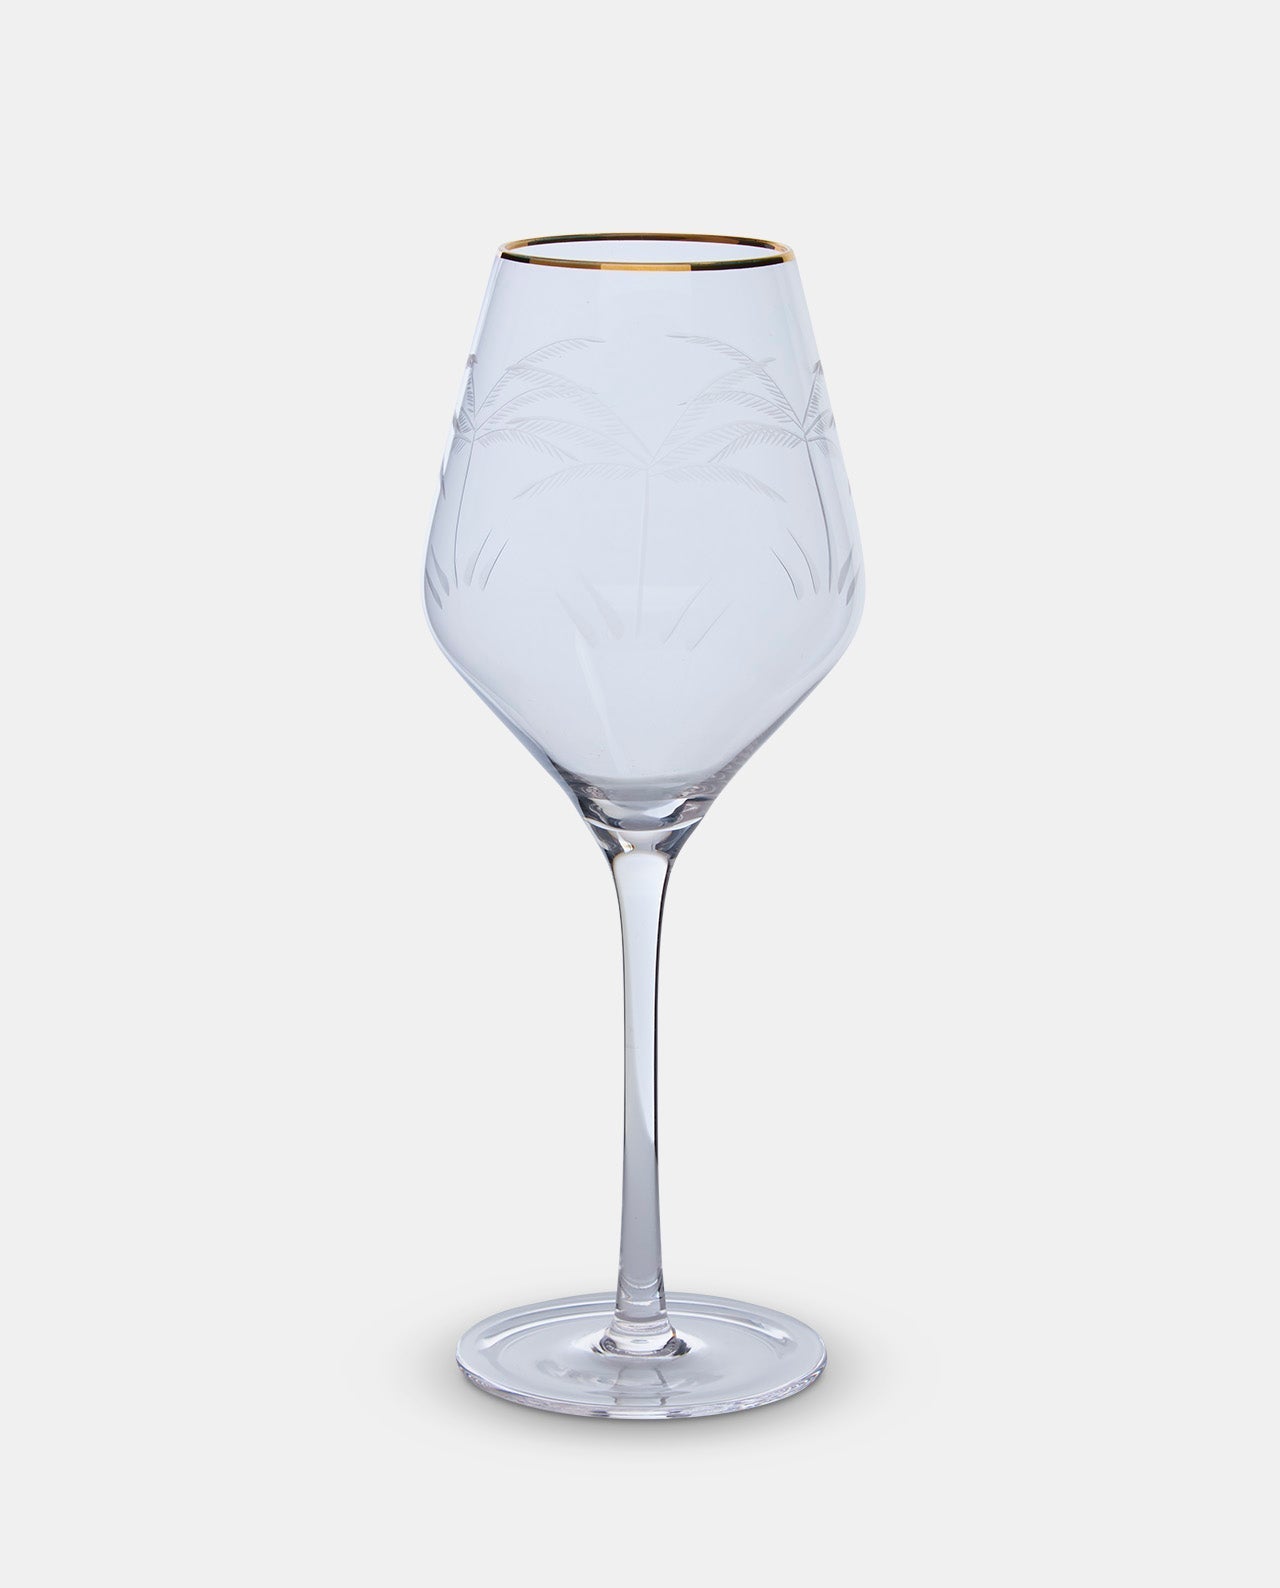 Gold Rim Palm Etched Wine Glass for sale - Woodcock and Cavendish